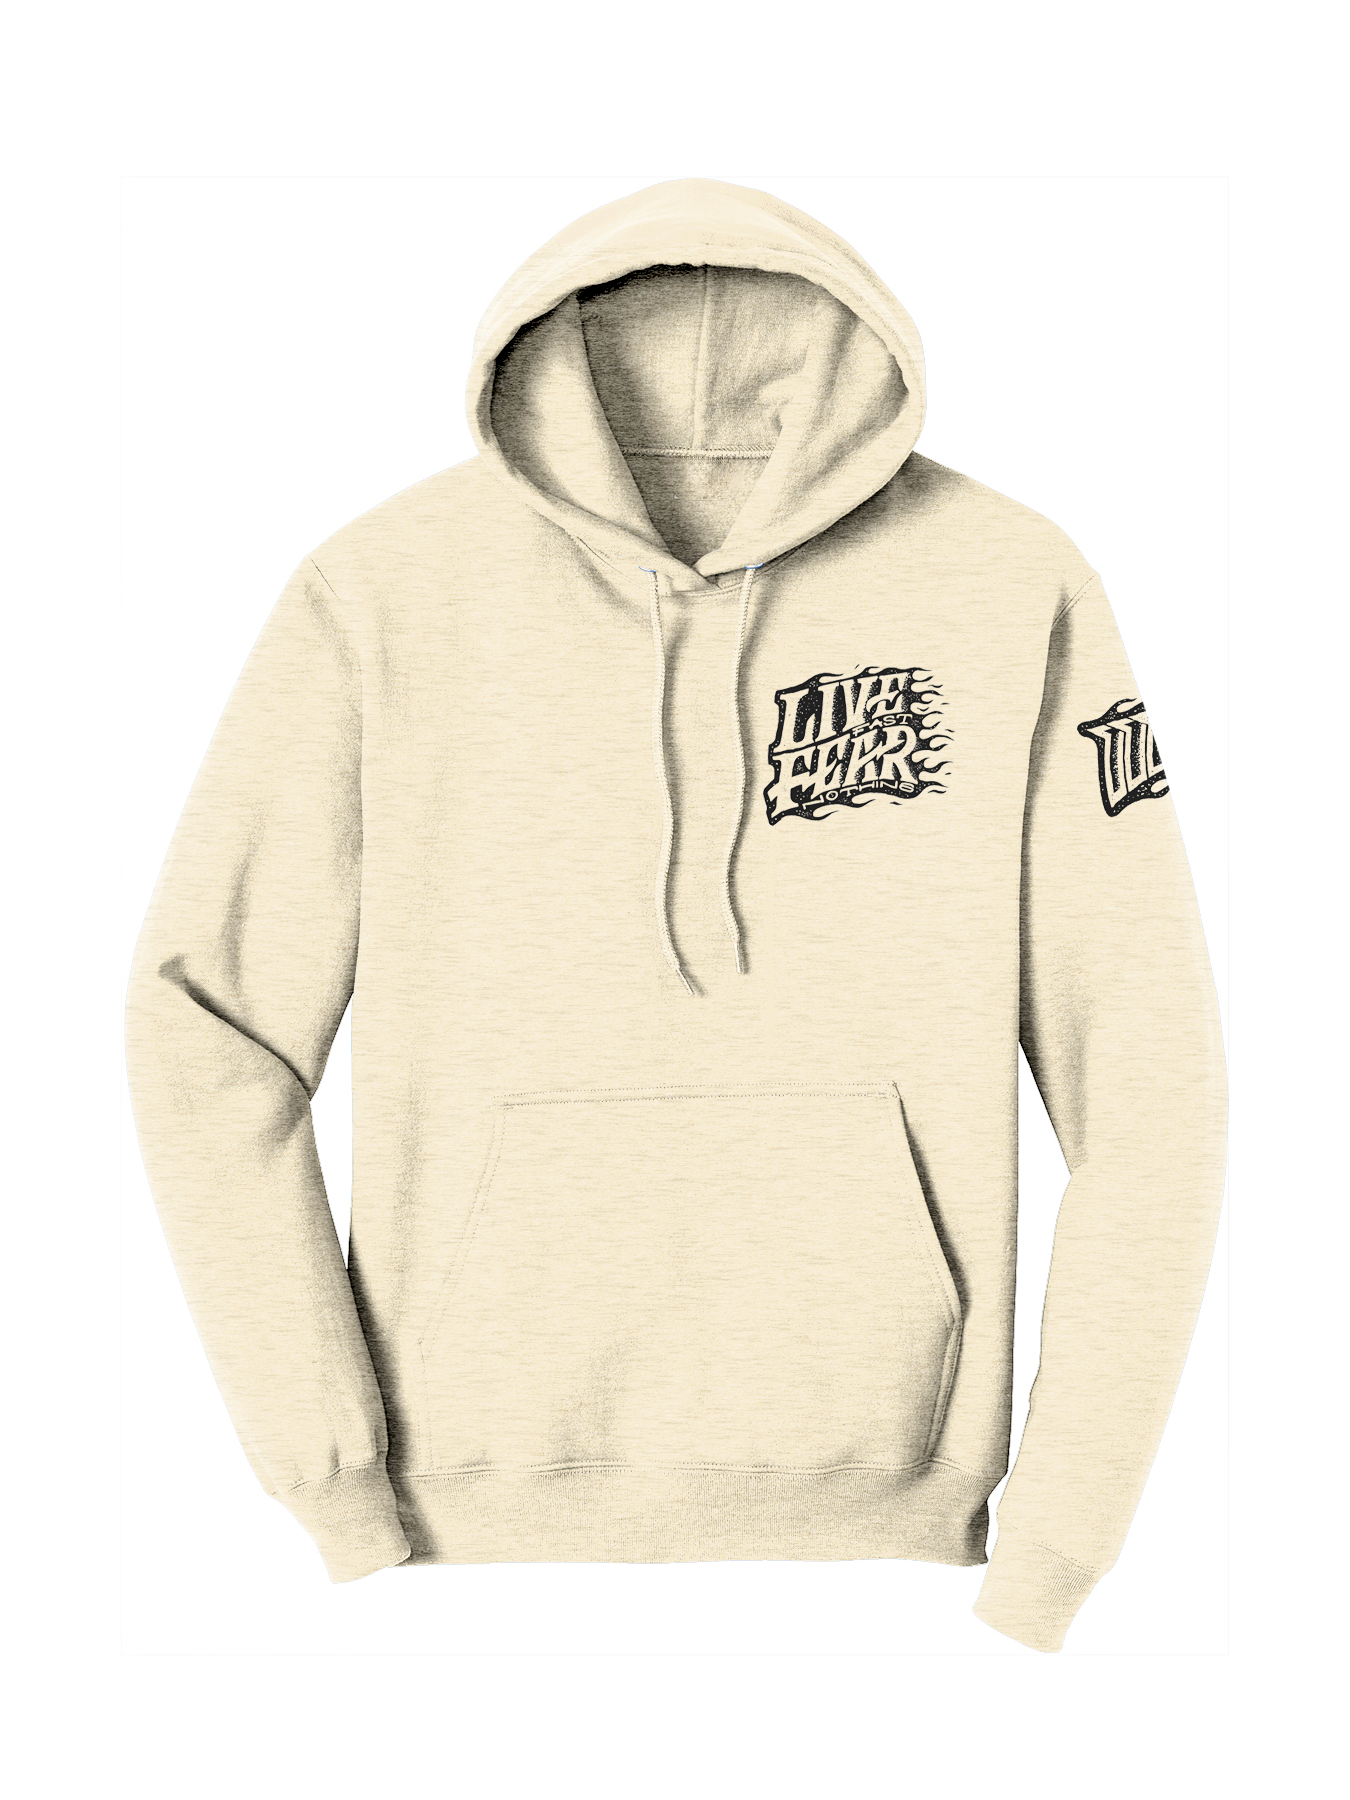 Live Fast Fear Nothing Flame Hoodie